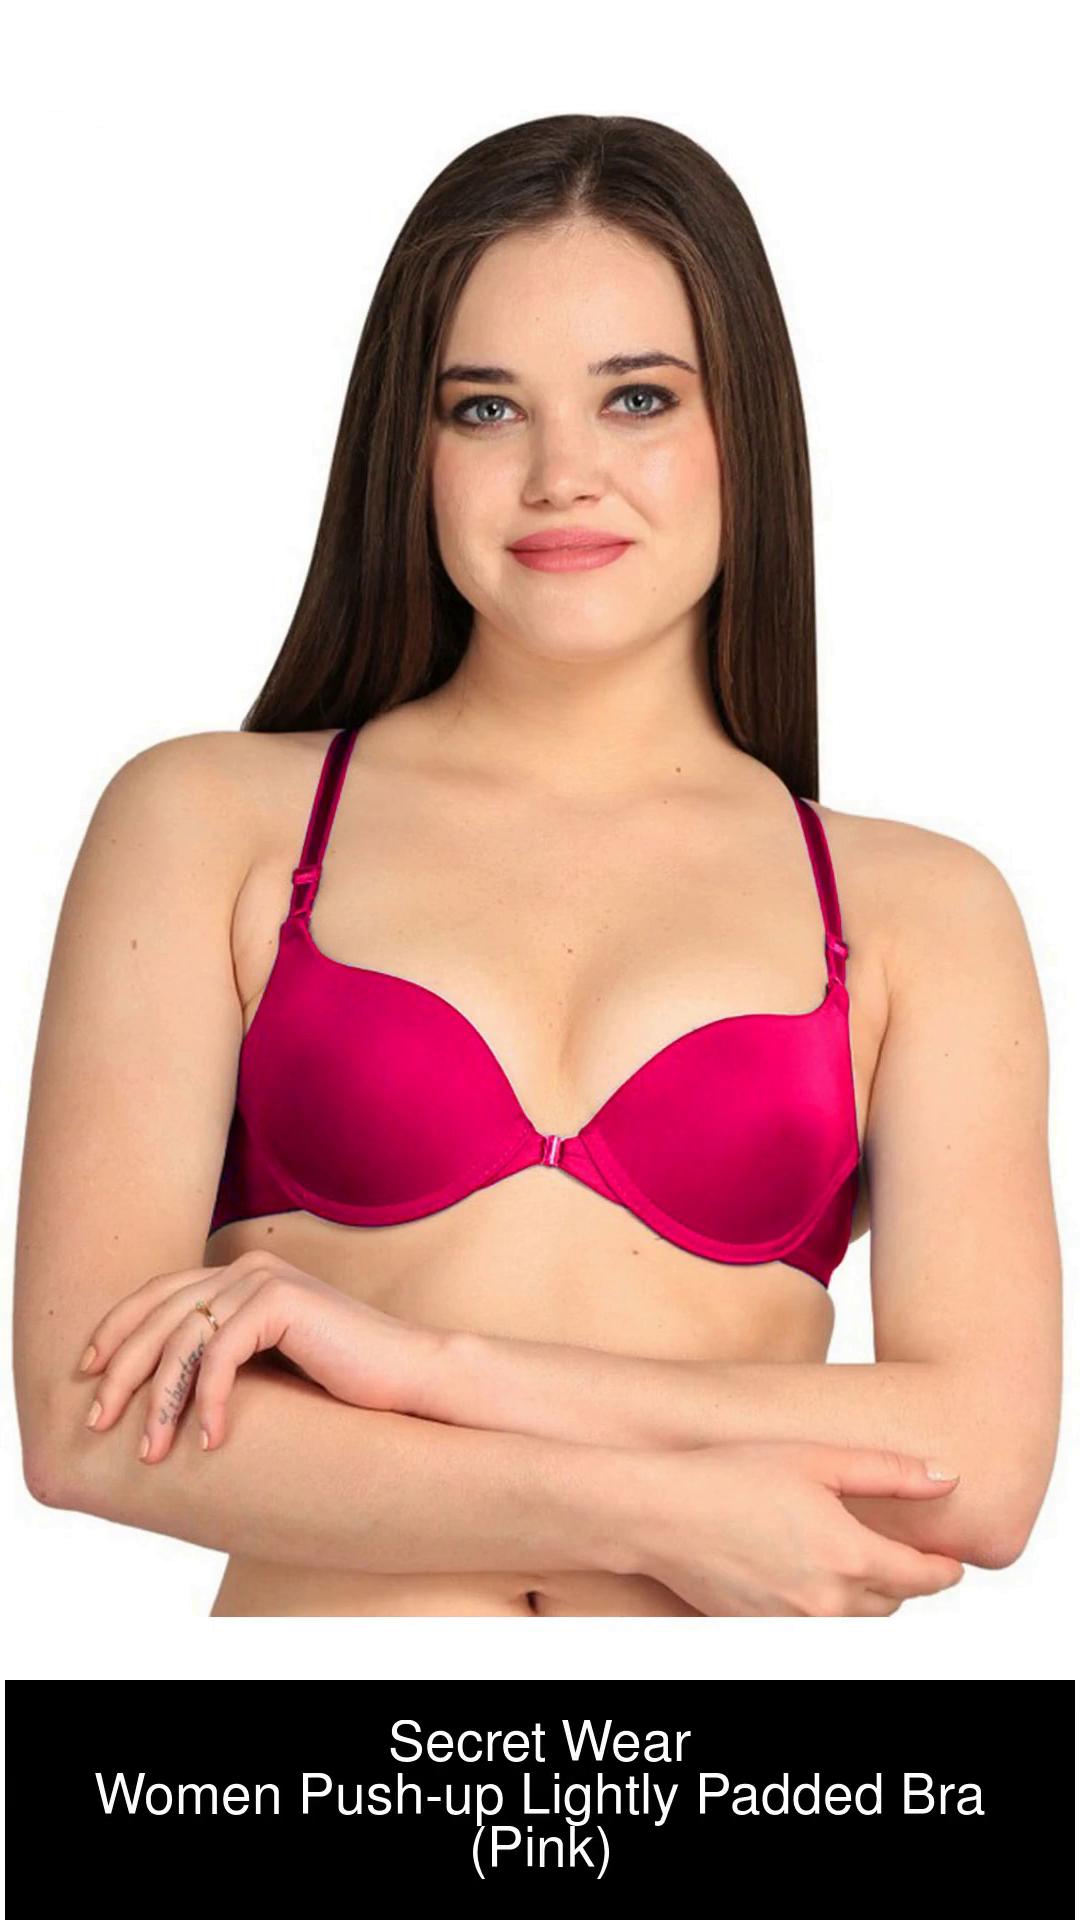 Secret Wear Women Push-up Lightly Padded Bra - Buy Pink Secret Wear Women  Push-up Lightly Padded Bra Online at Best Prices in India